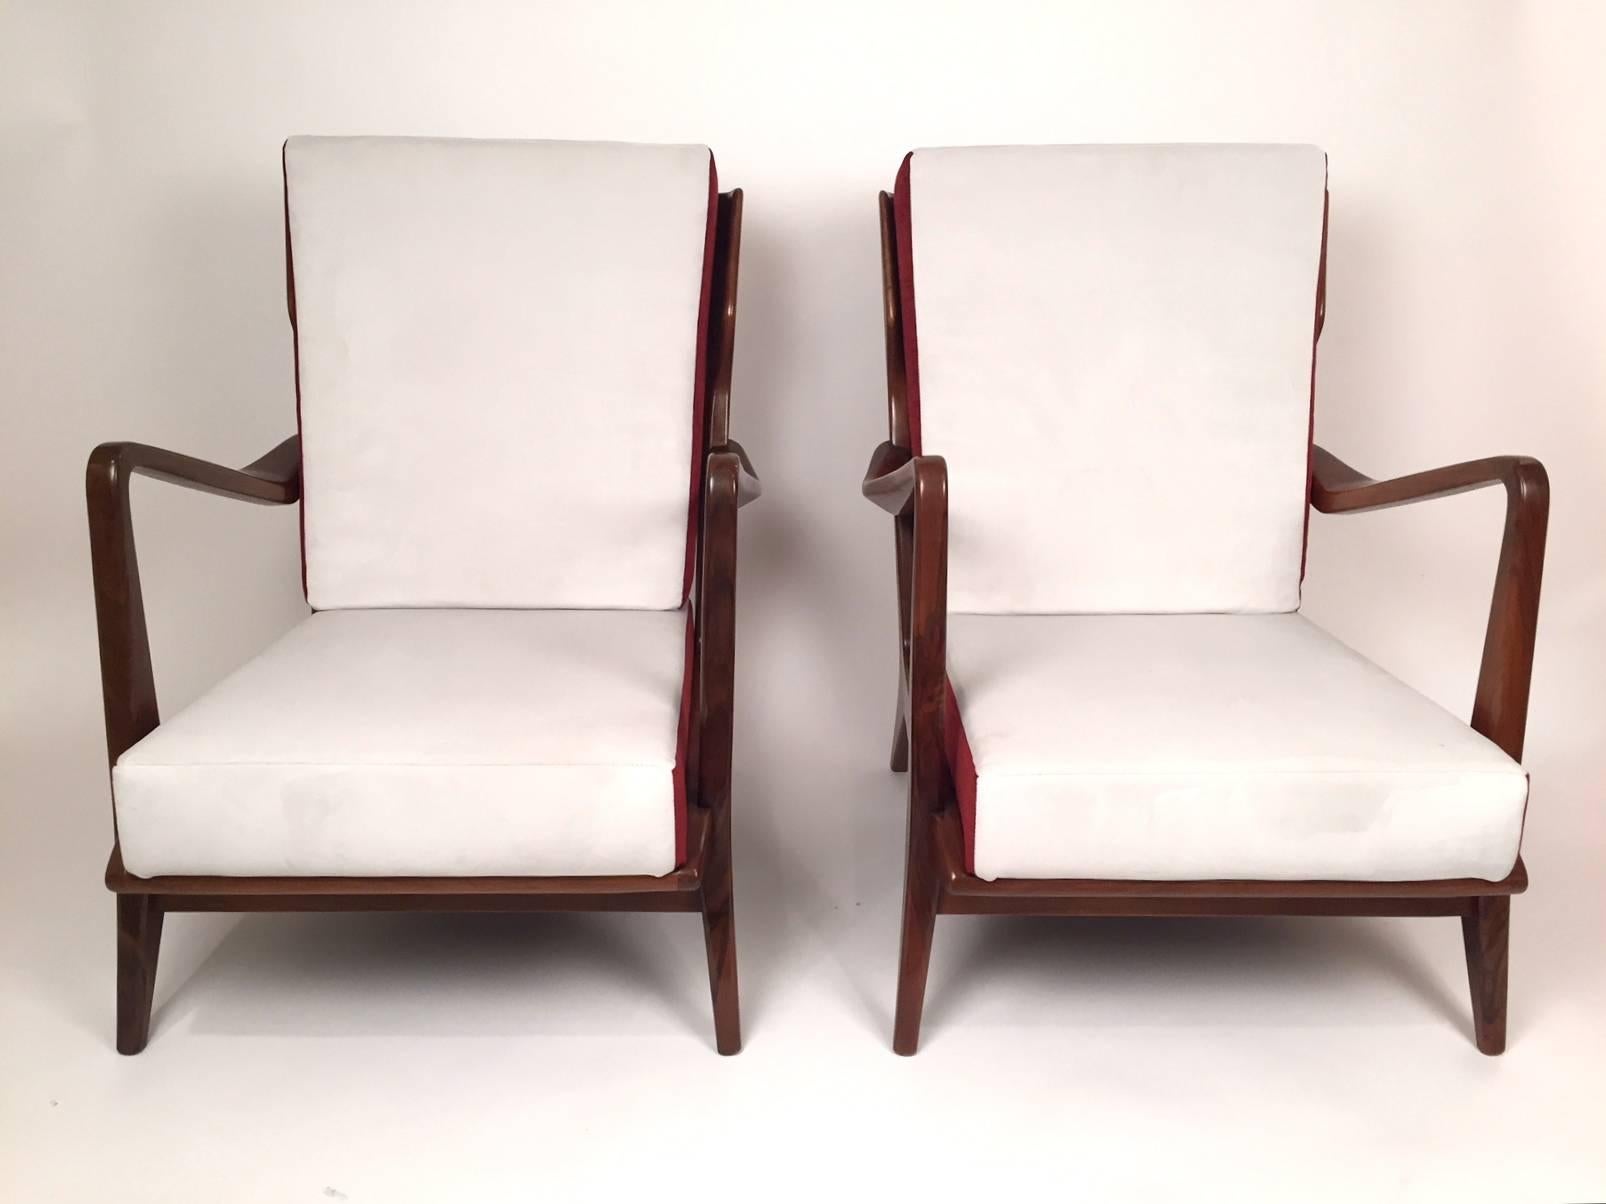 A pair of armchairs, model 516 , designed by Gio Ponti and edited by Cassina in the 1950s.  Walnut wood and fabric. Upwards rising arms and vertical open slats on the back.
Each chair has at the reverse a metal label stating :